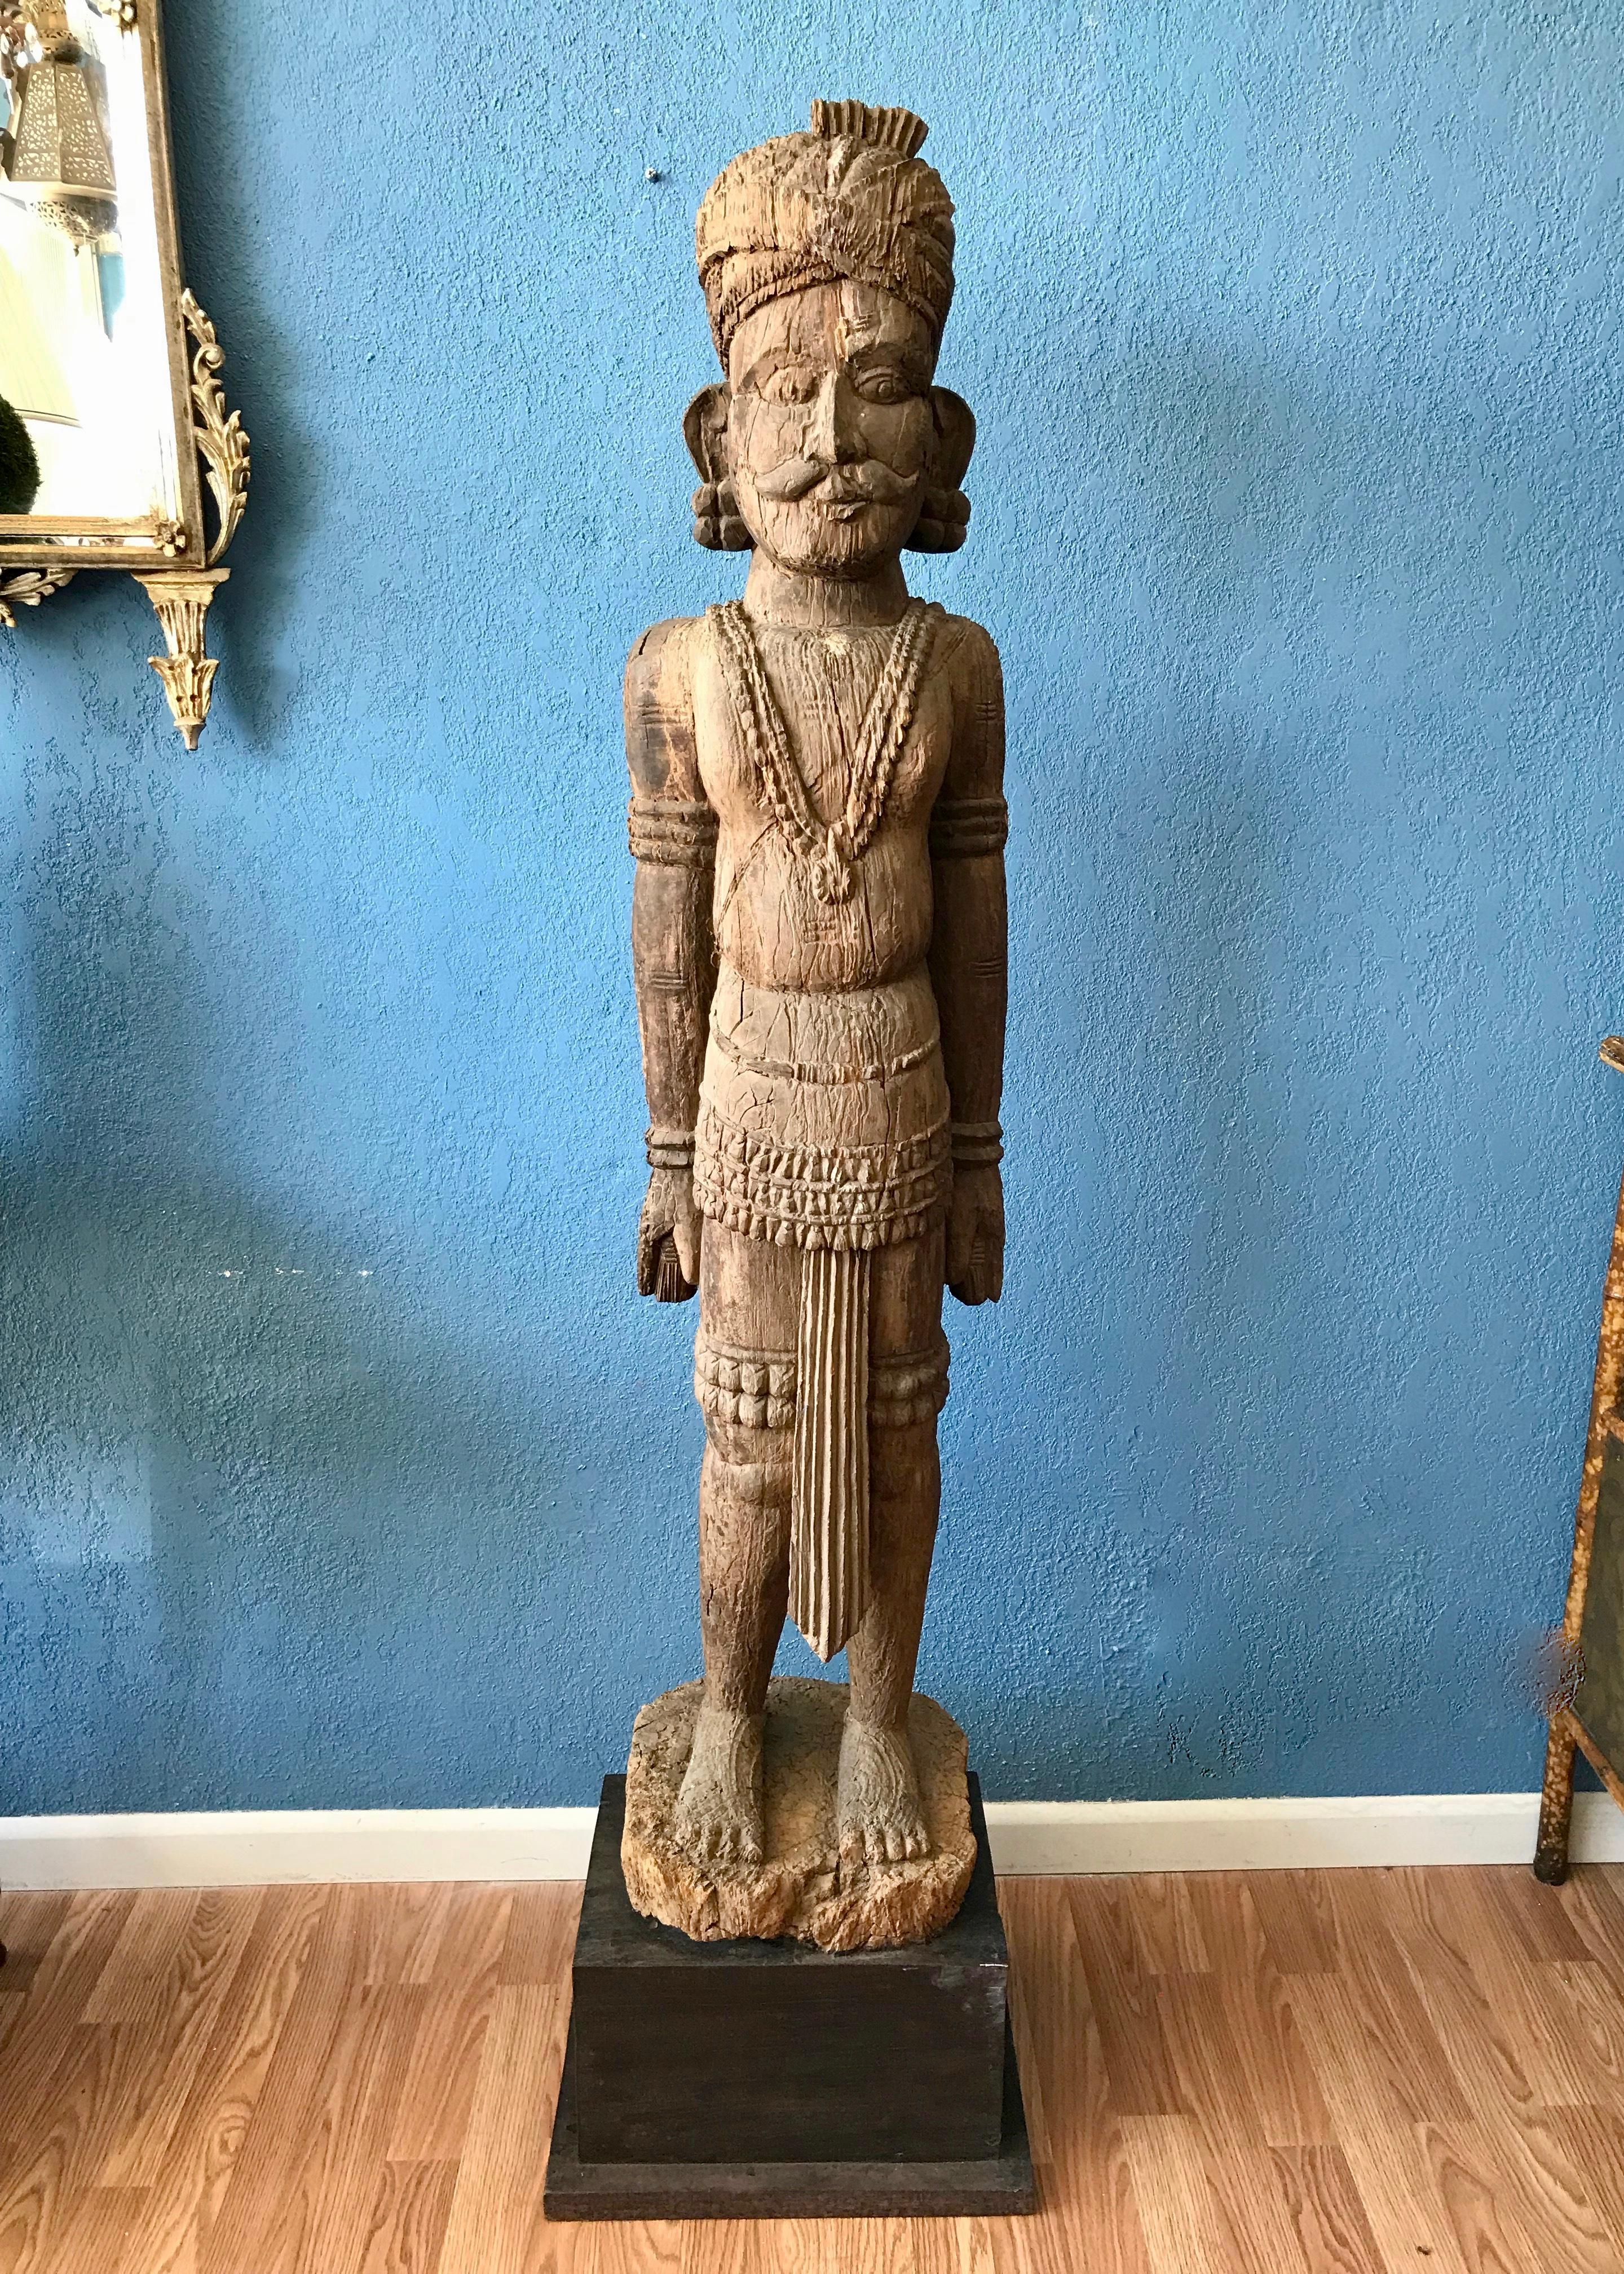 Outstanding and Dramatic Anglo Indian sculpture.
The mustachioed figure is clad in formal garb and
his head is wrapped in a traditional turban. The
unusual and bold figure appears to be carved from
a single tree trunk . The carving is